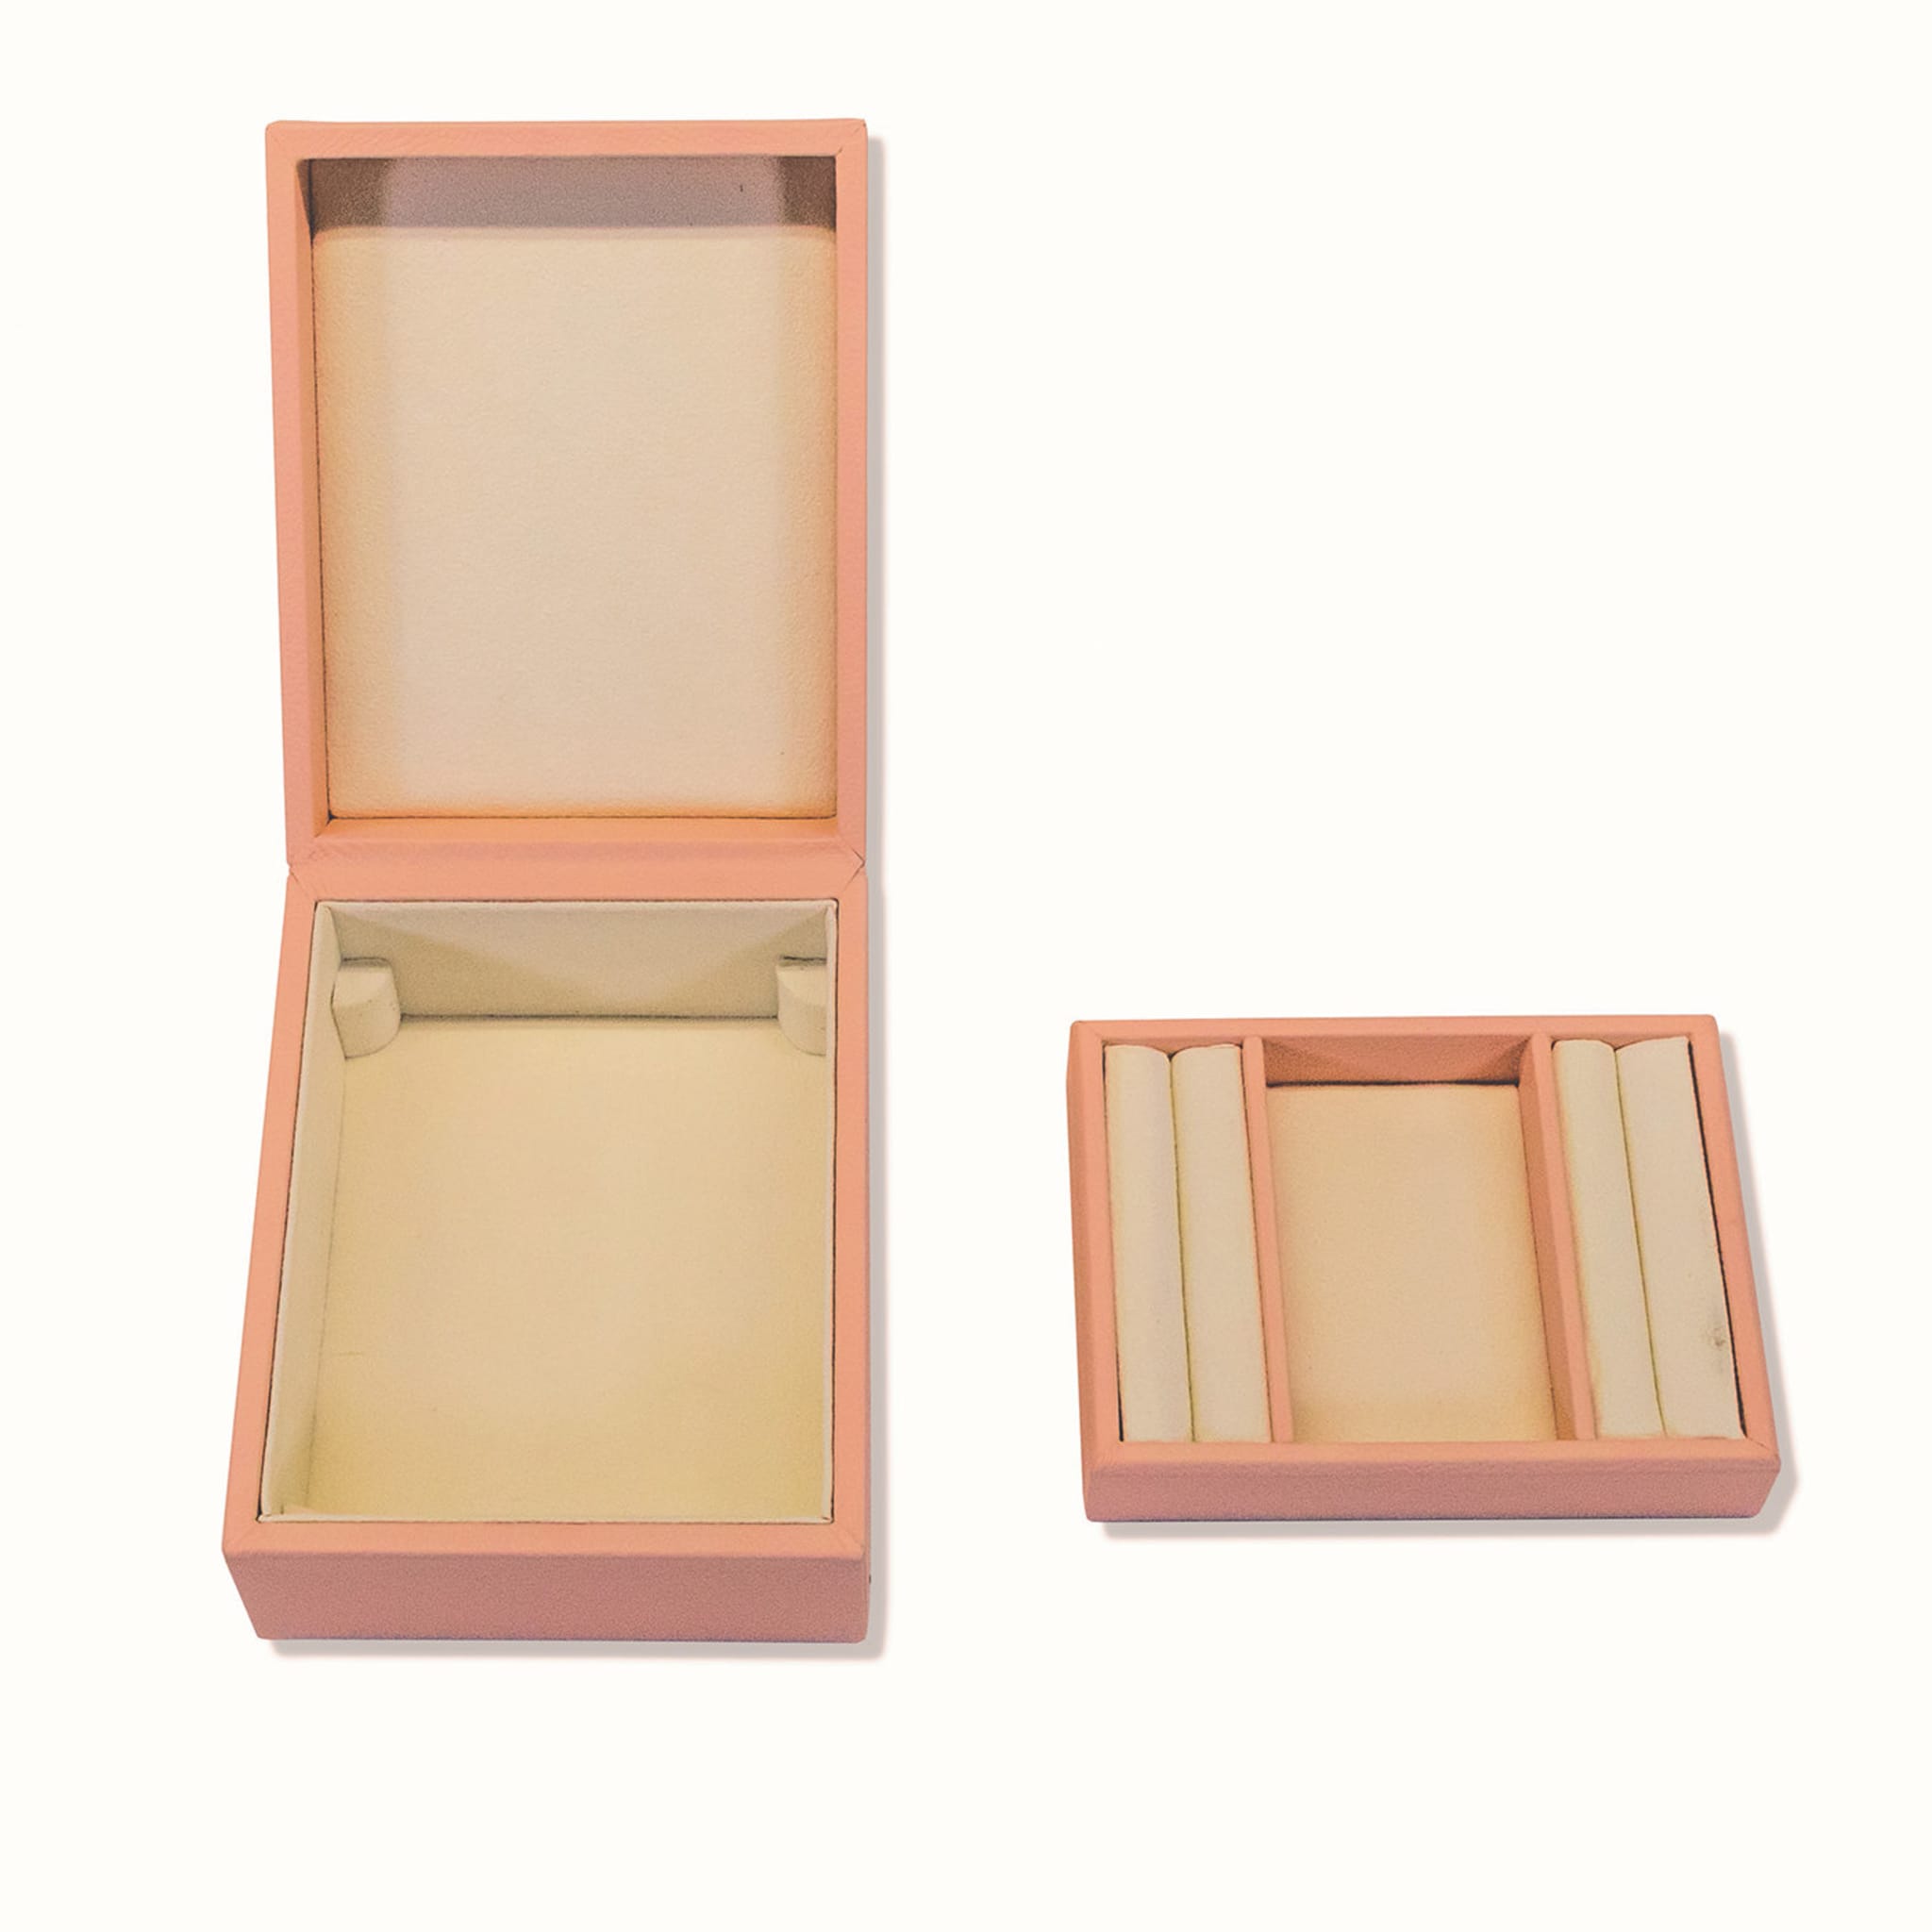 Arc Jewelry Box with Removable Tray - Alternative view 3